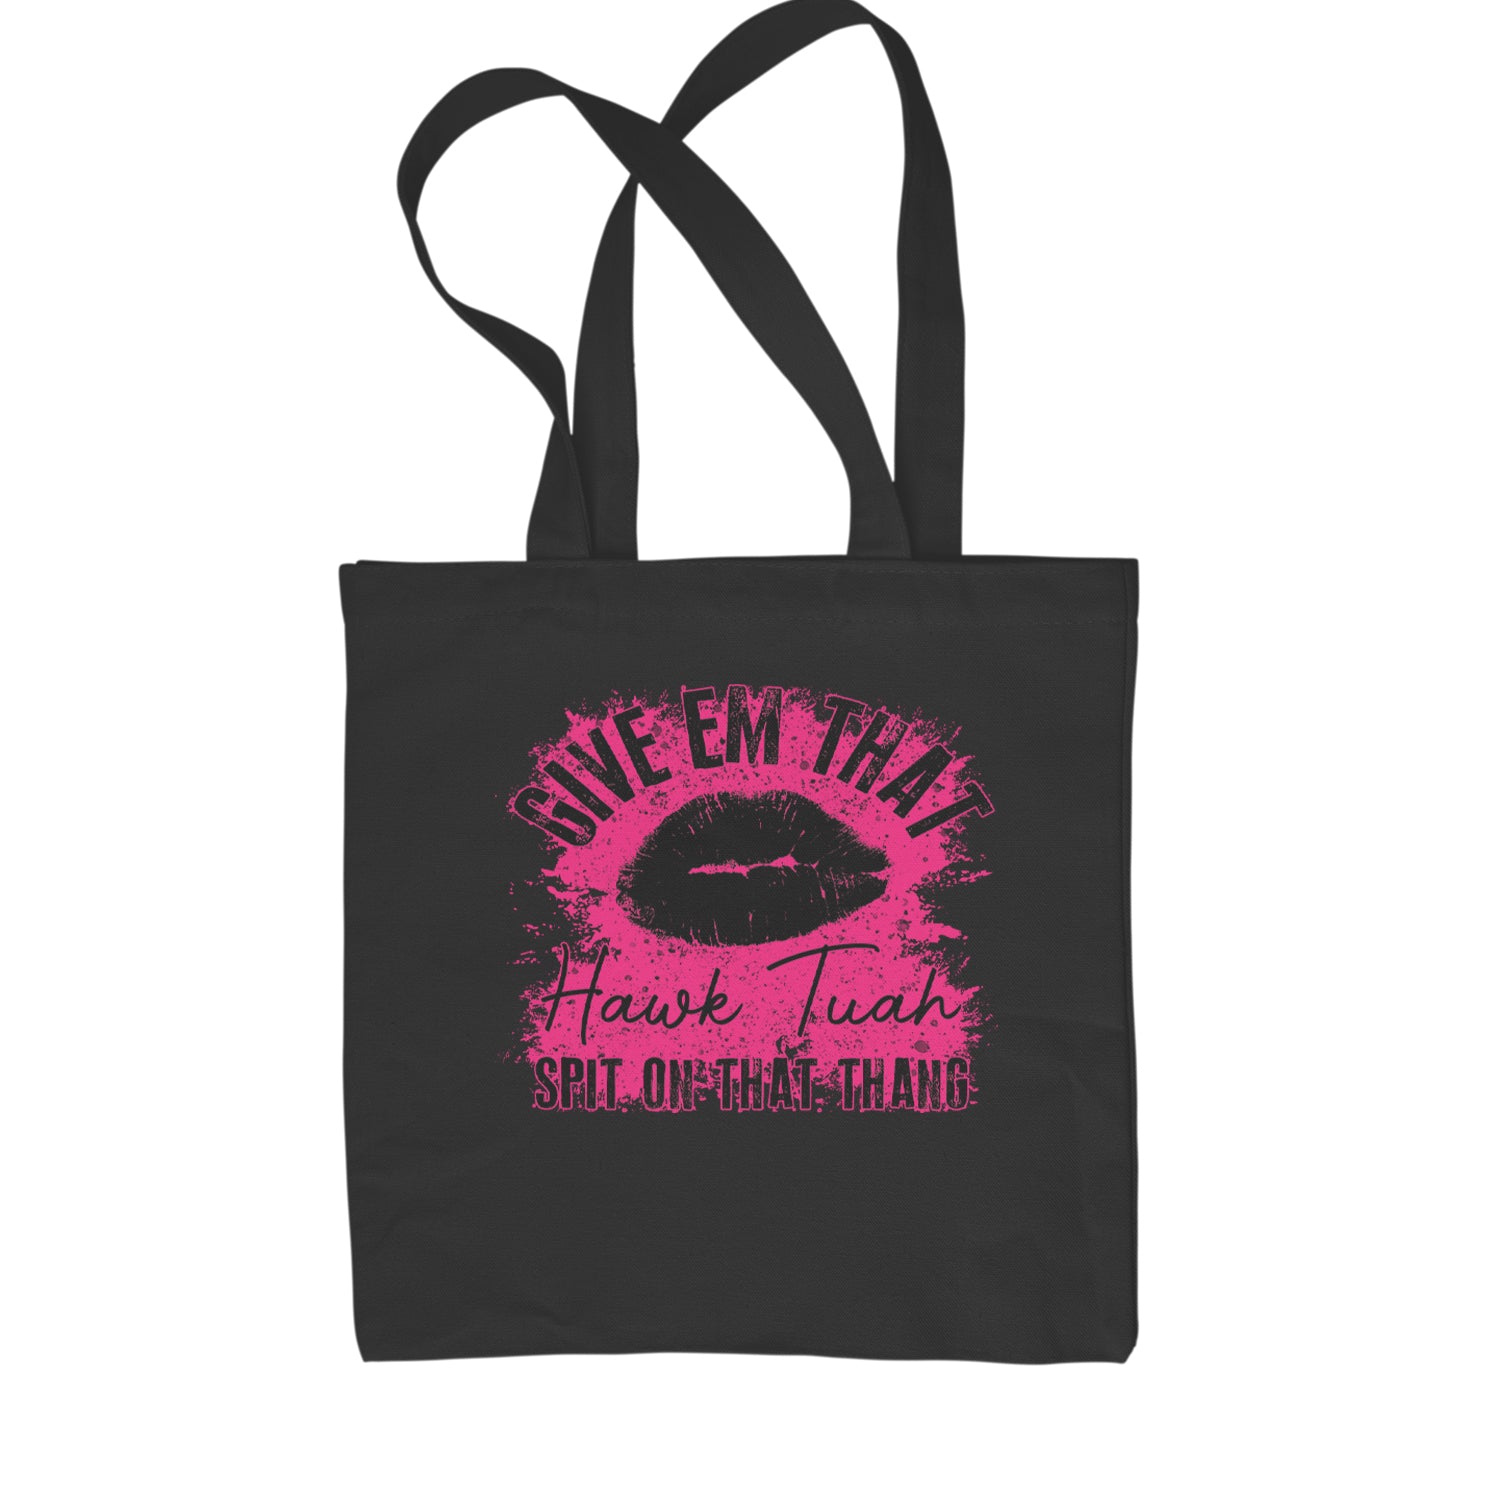 Give 'Em Hawk Tuah Spit On That Thang Shopping Tote Bag Natural